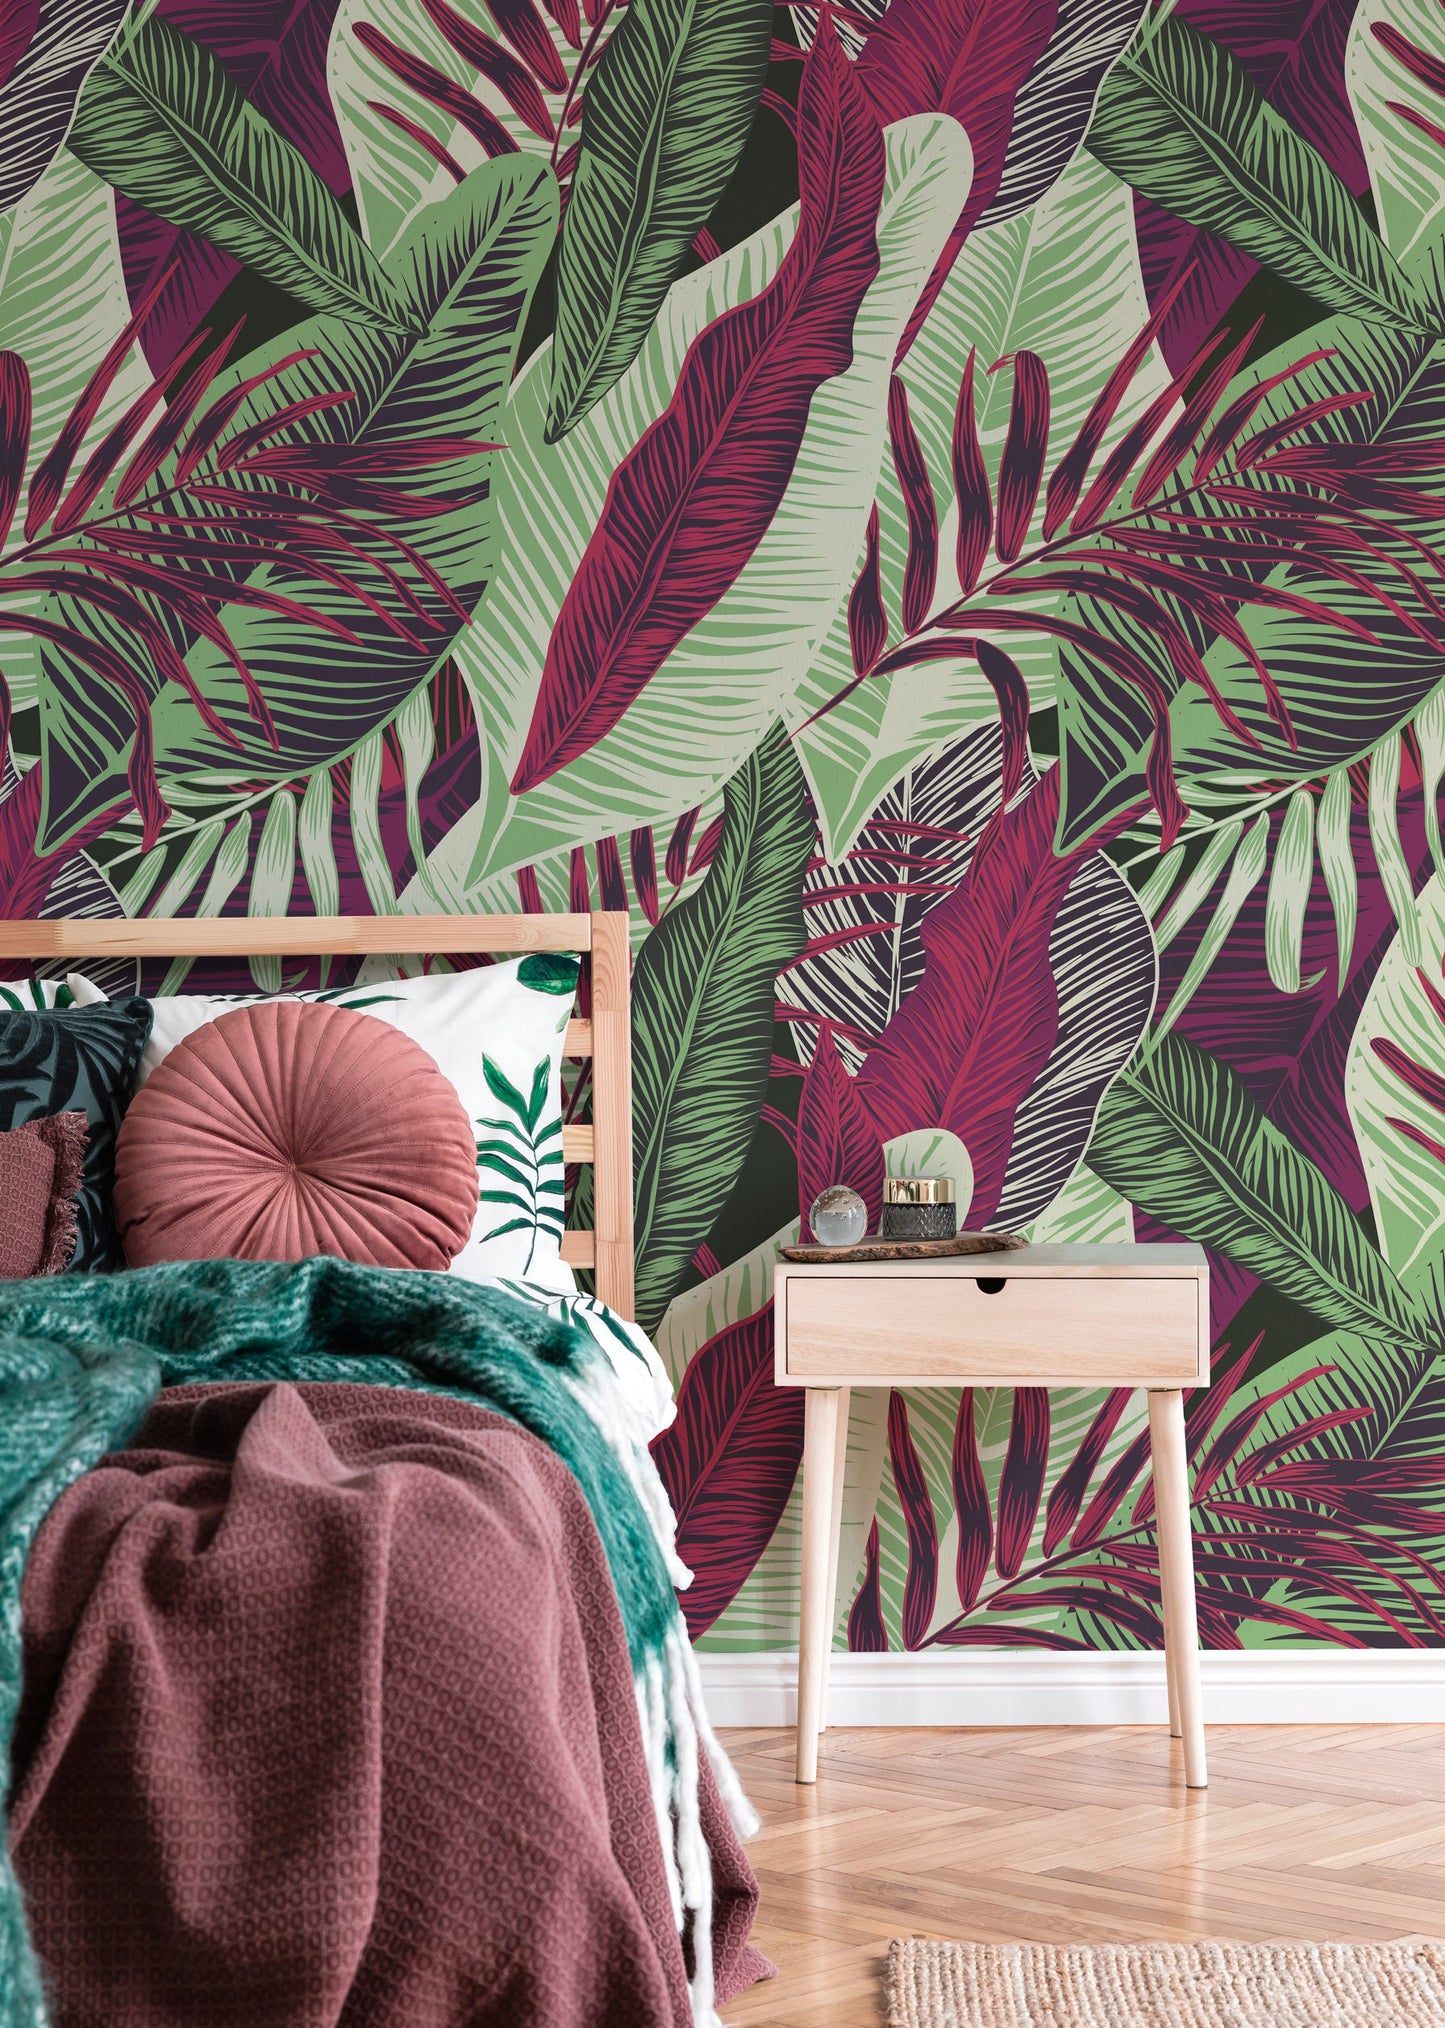 Wallpaper Peel and Stick Wallpaper Removable Wallpaper Home Decor Wall Decor Room Decor/ Red and Green Cool Tropical Leaves Wallpaper -B132